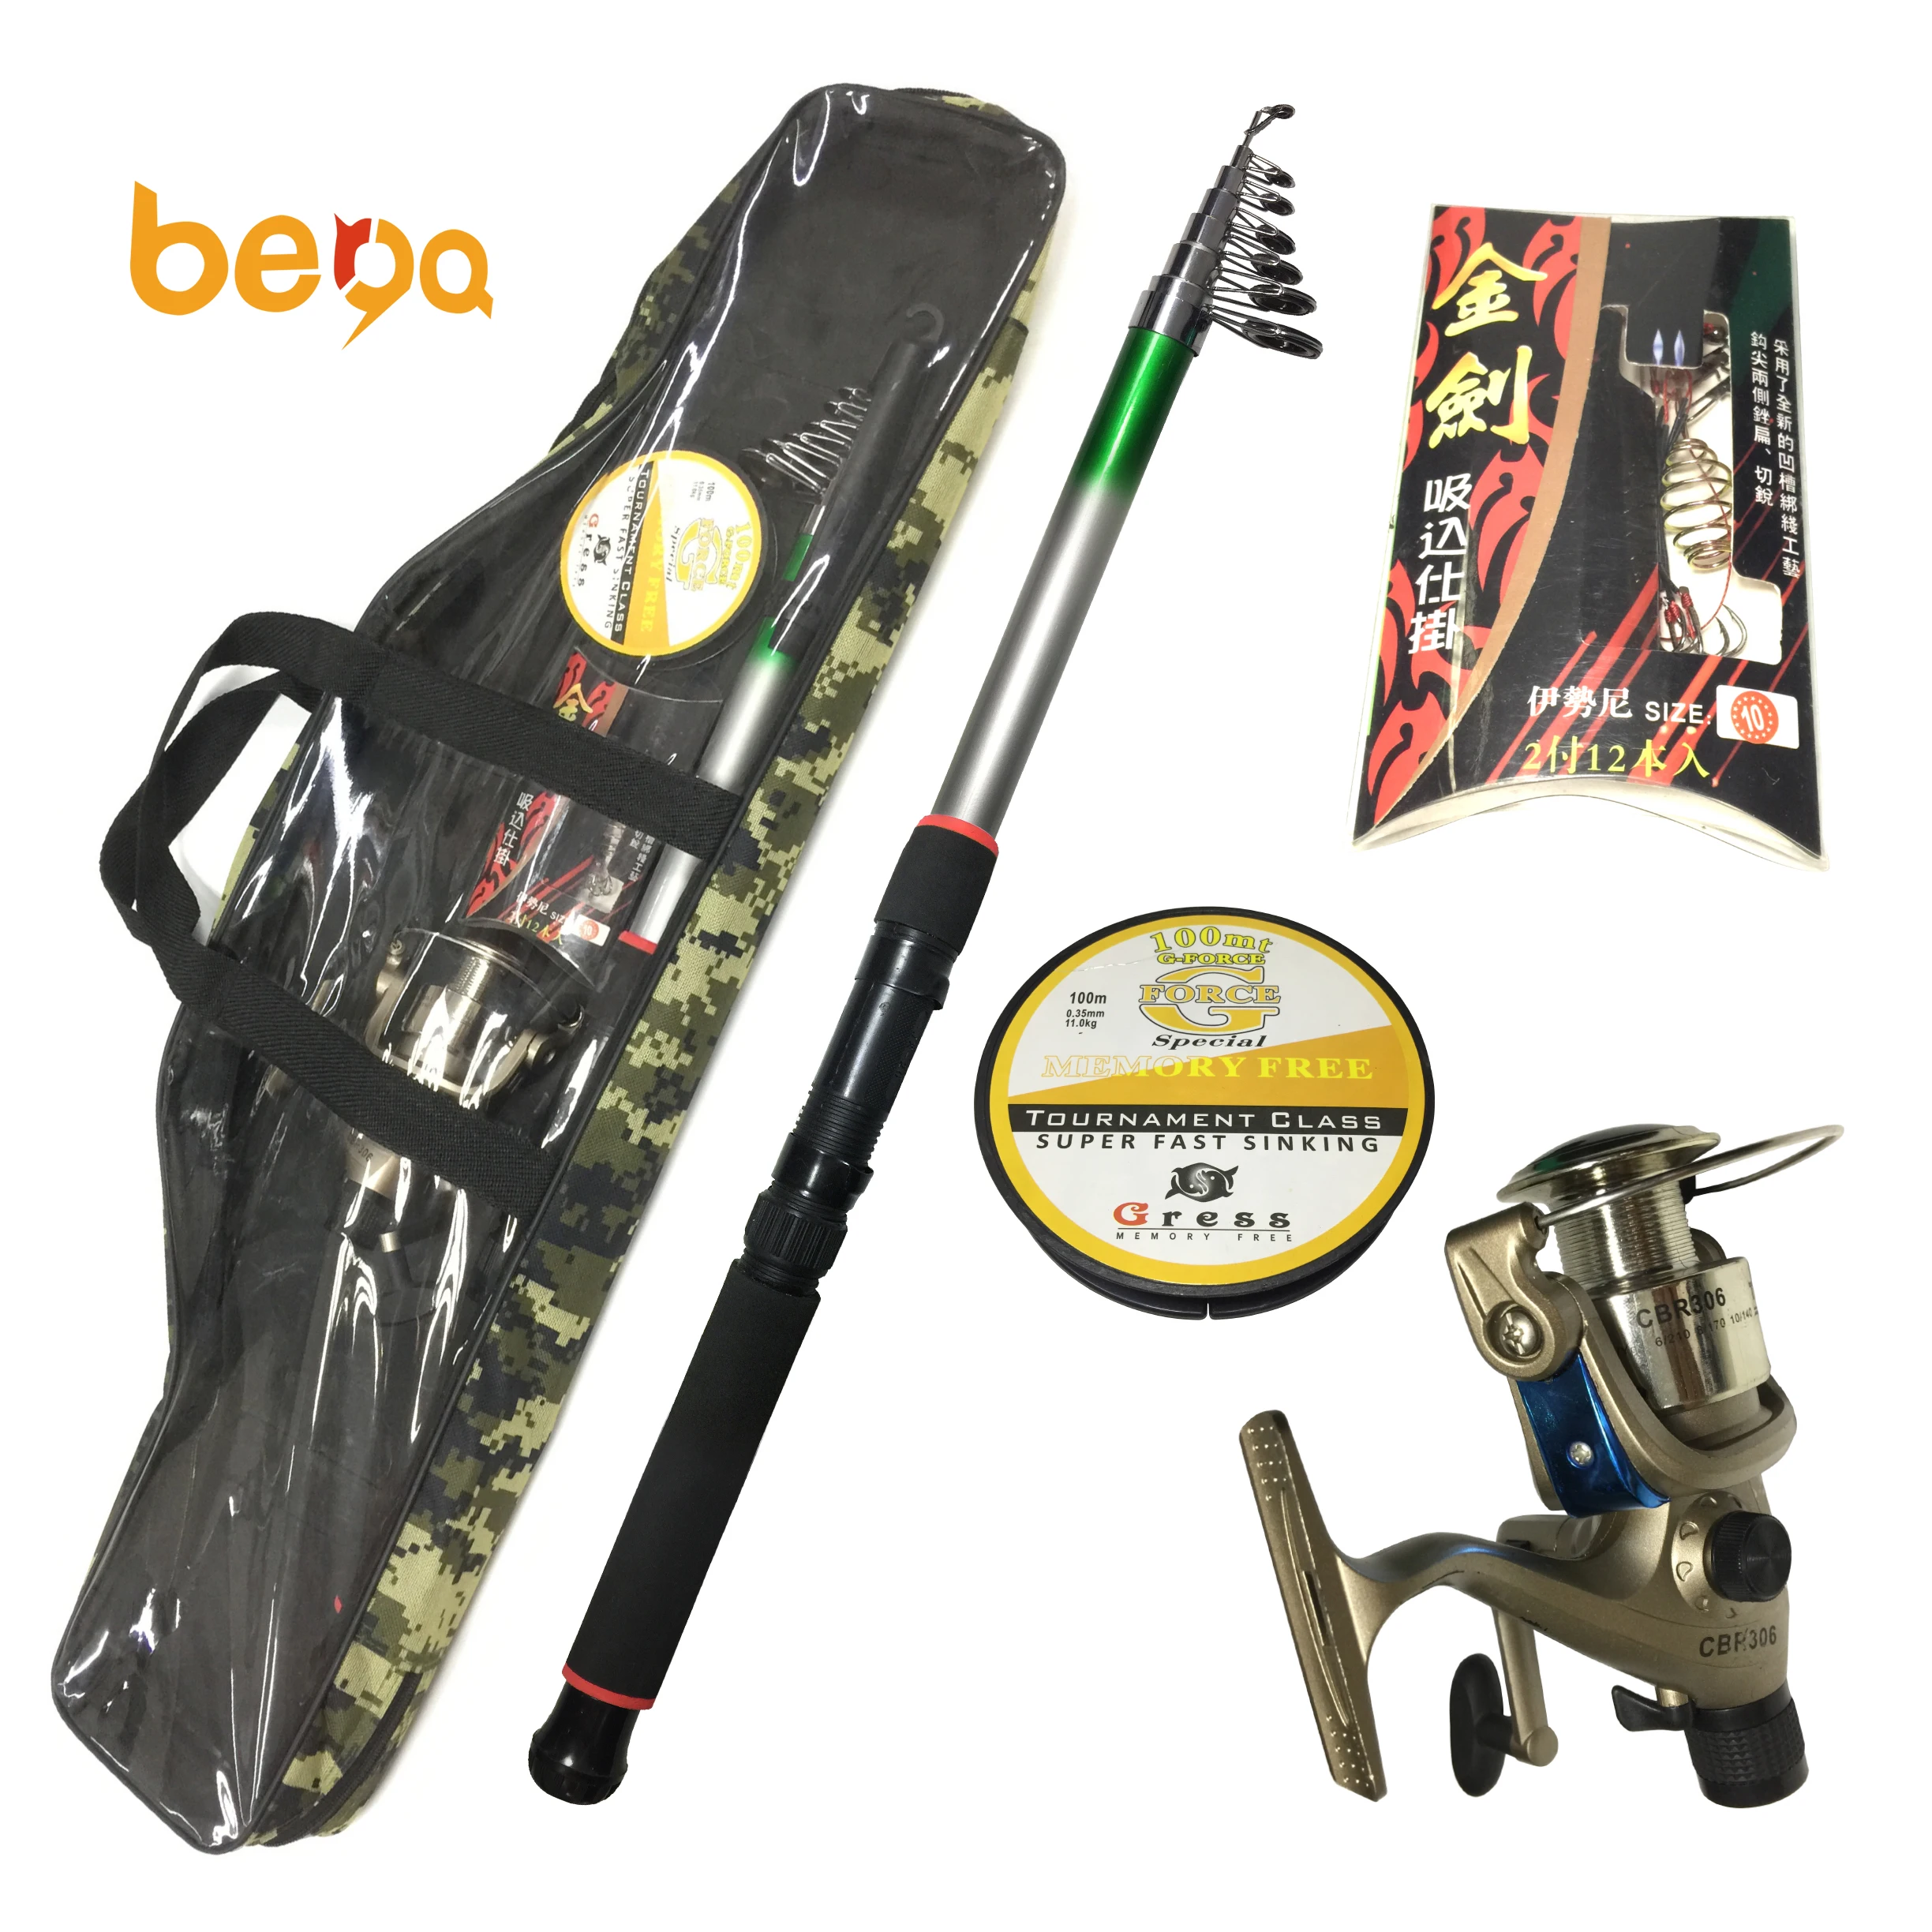 

New Packing Spinning Telescopic Fishing Rod and reel Combo Kit Set with Fishing line and hooks fishing combo bag package, Black/white/red/yellow/orange, customizable